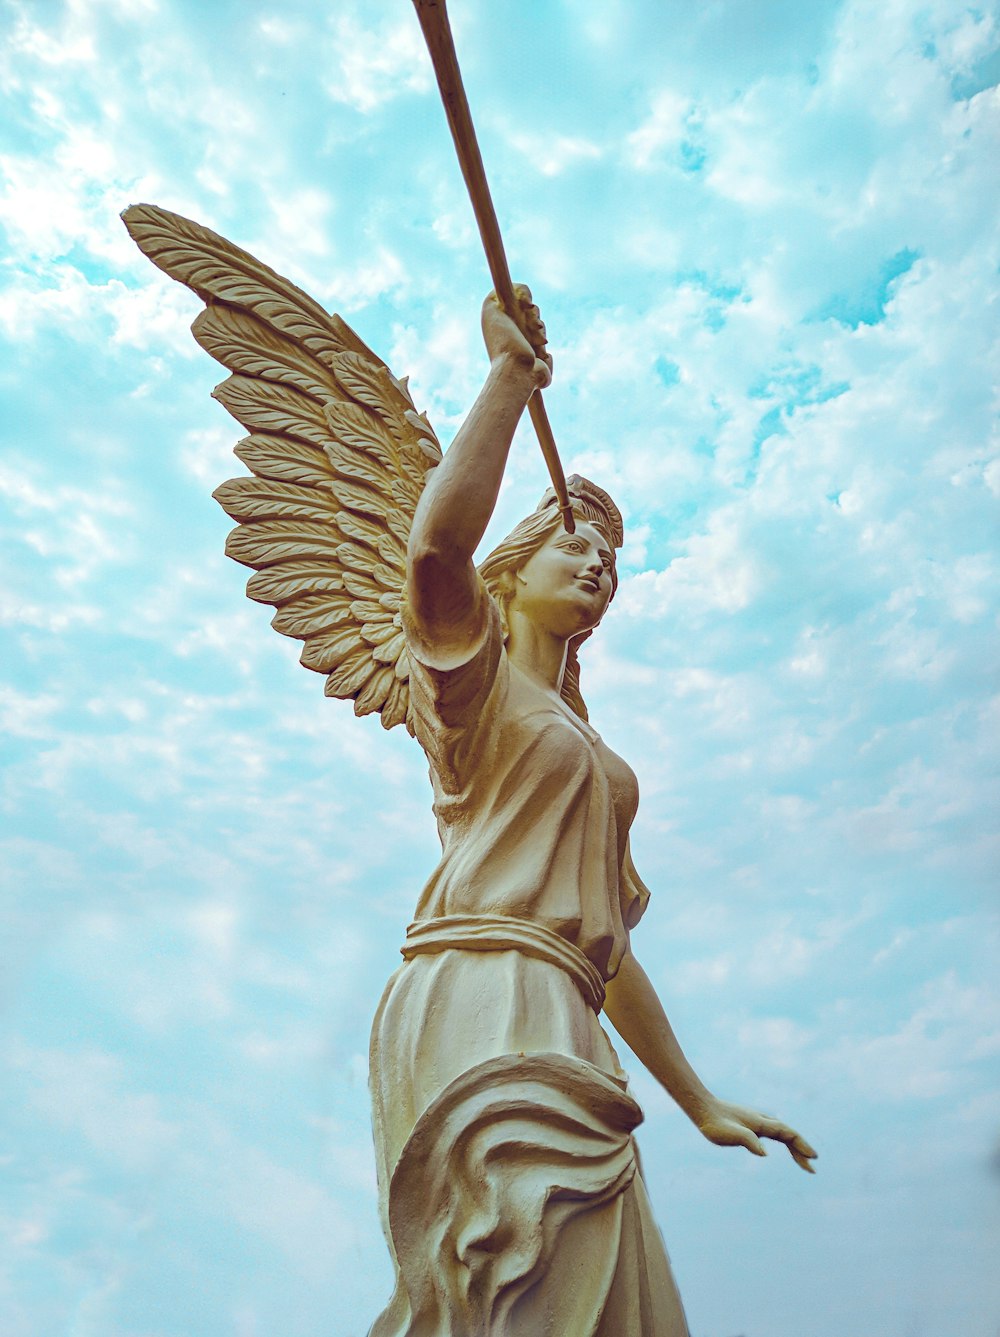 angel statue under white clouds and blue sky during daytime